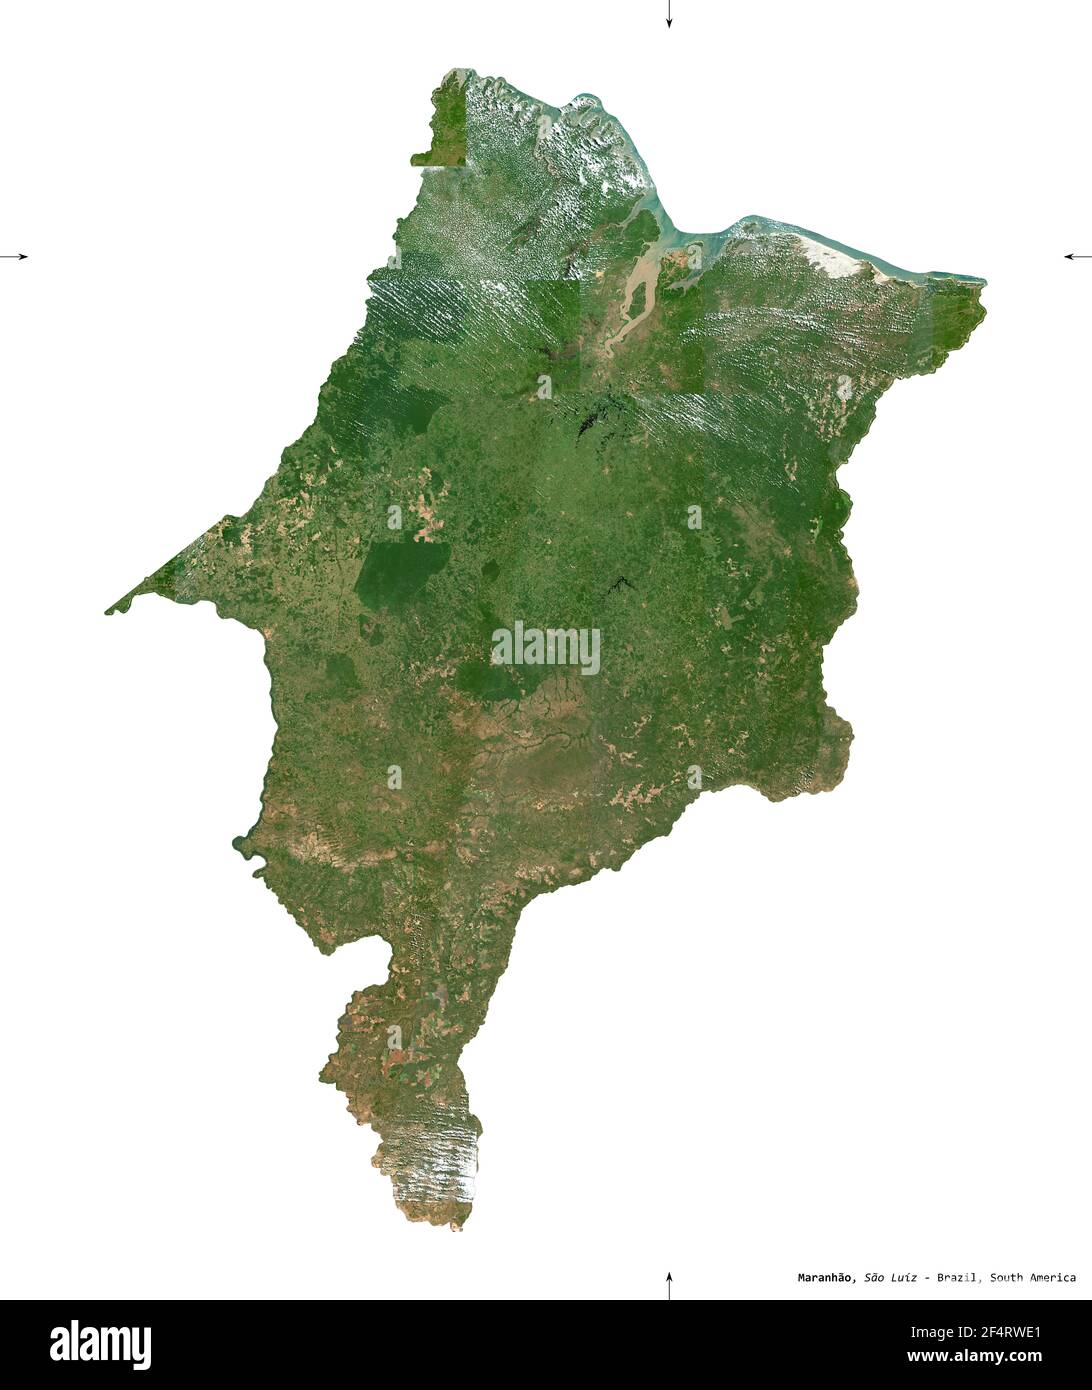 Maranhao, state of Brazil. Sentinel-2 satellite imagery. Shape isolated on white solid. Description, location of the capital. Contains modified Copern Stock Photo